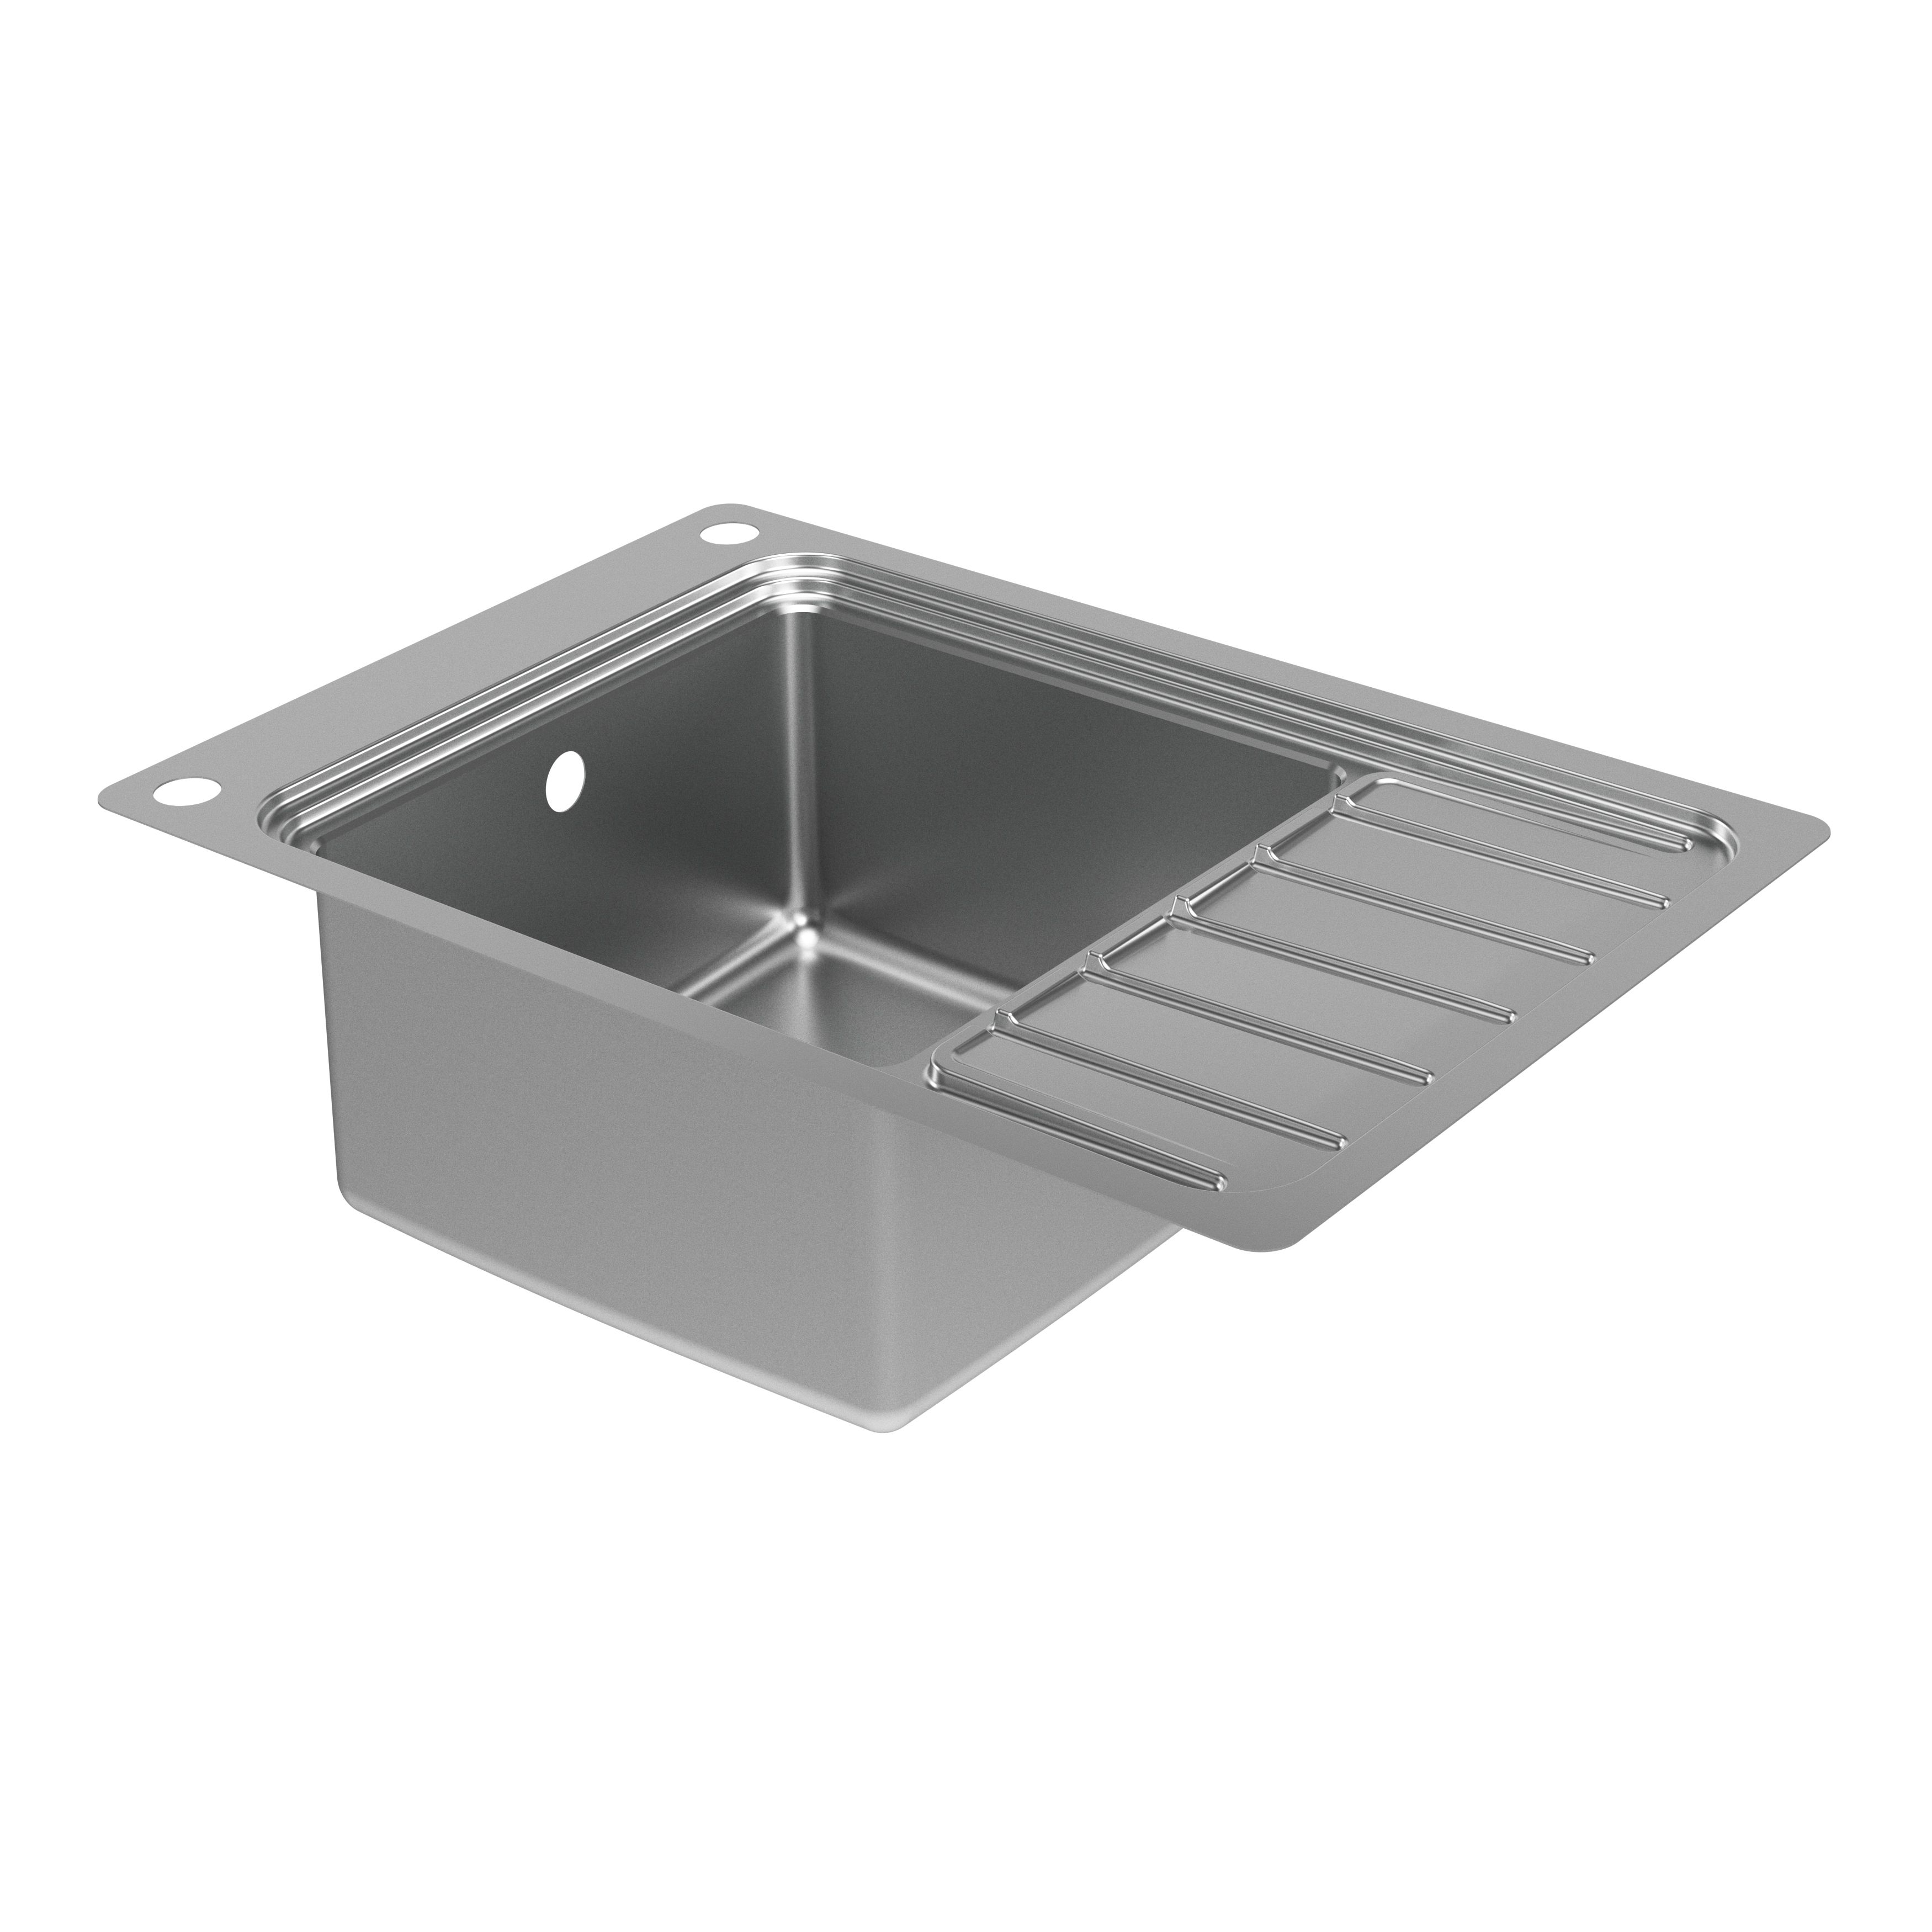 GoodHome Romesco Brushed Stainless steel 1 Bowl Kitchen sink With compact drainer 510mm x 770mm